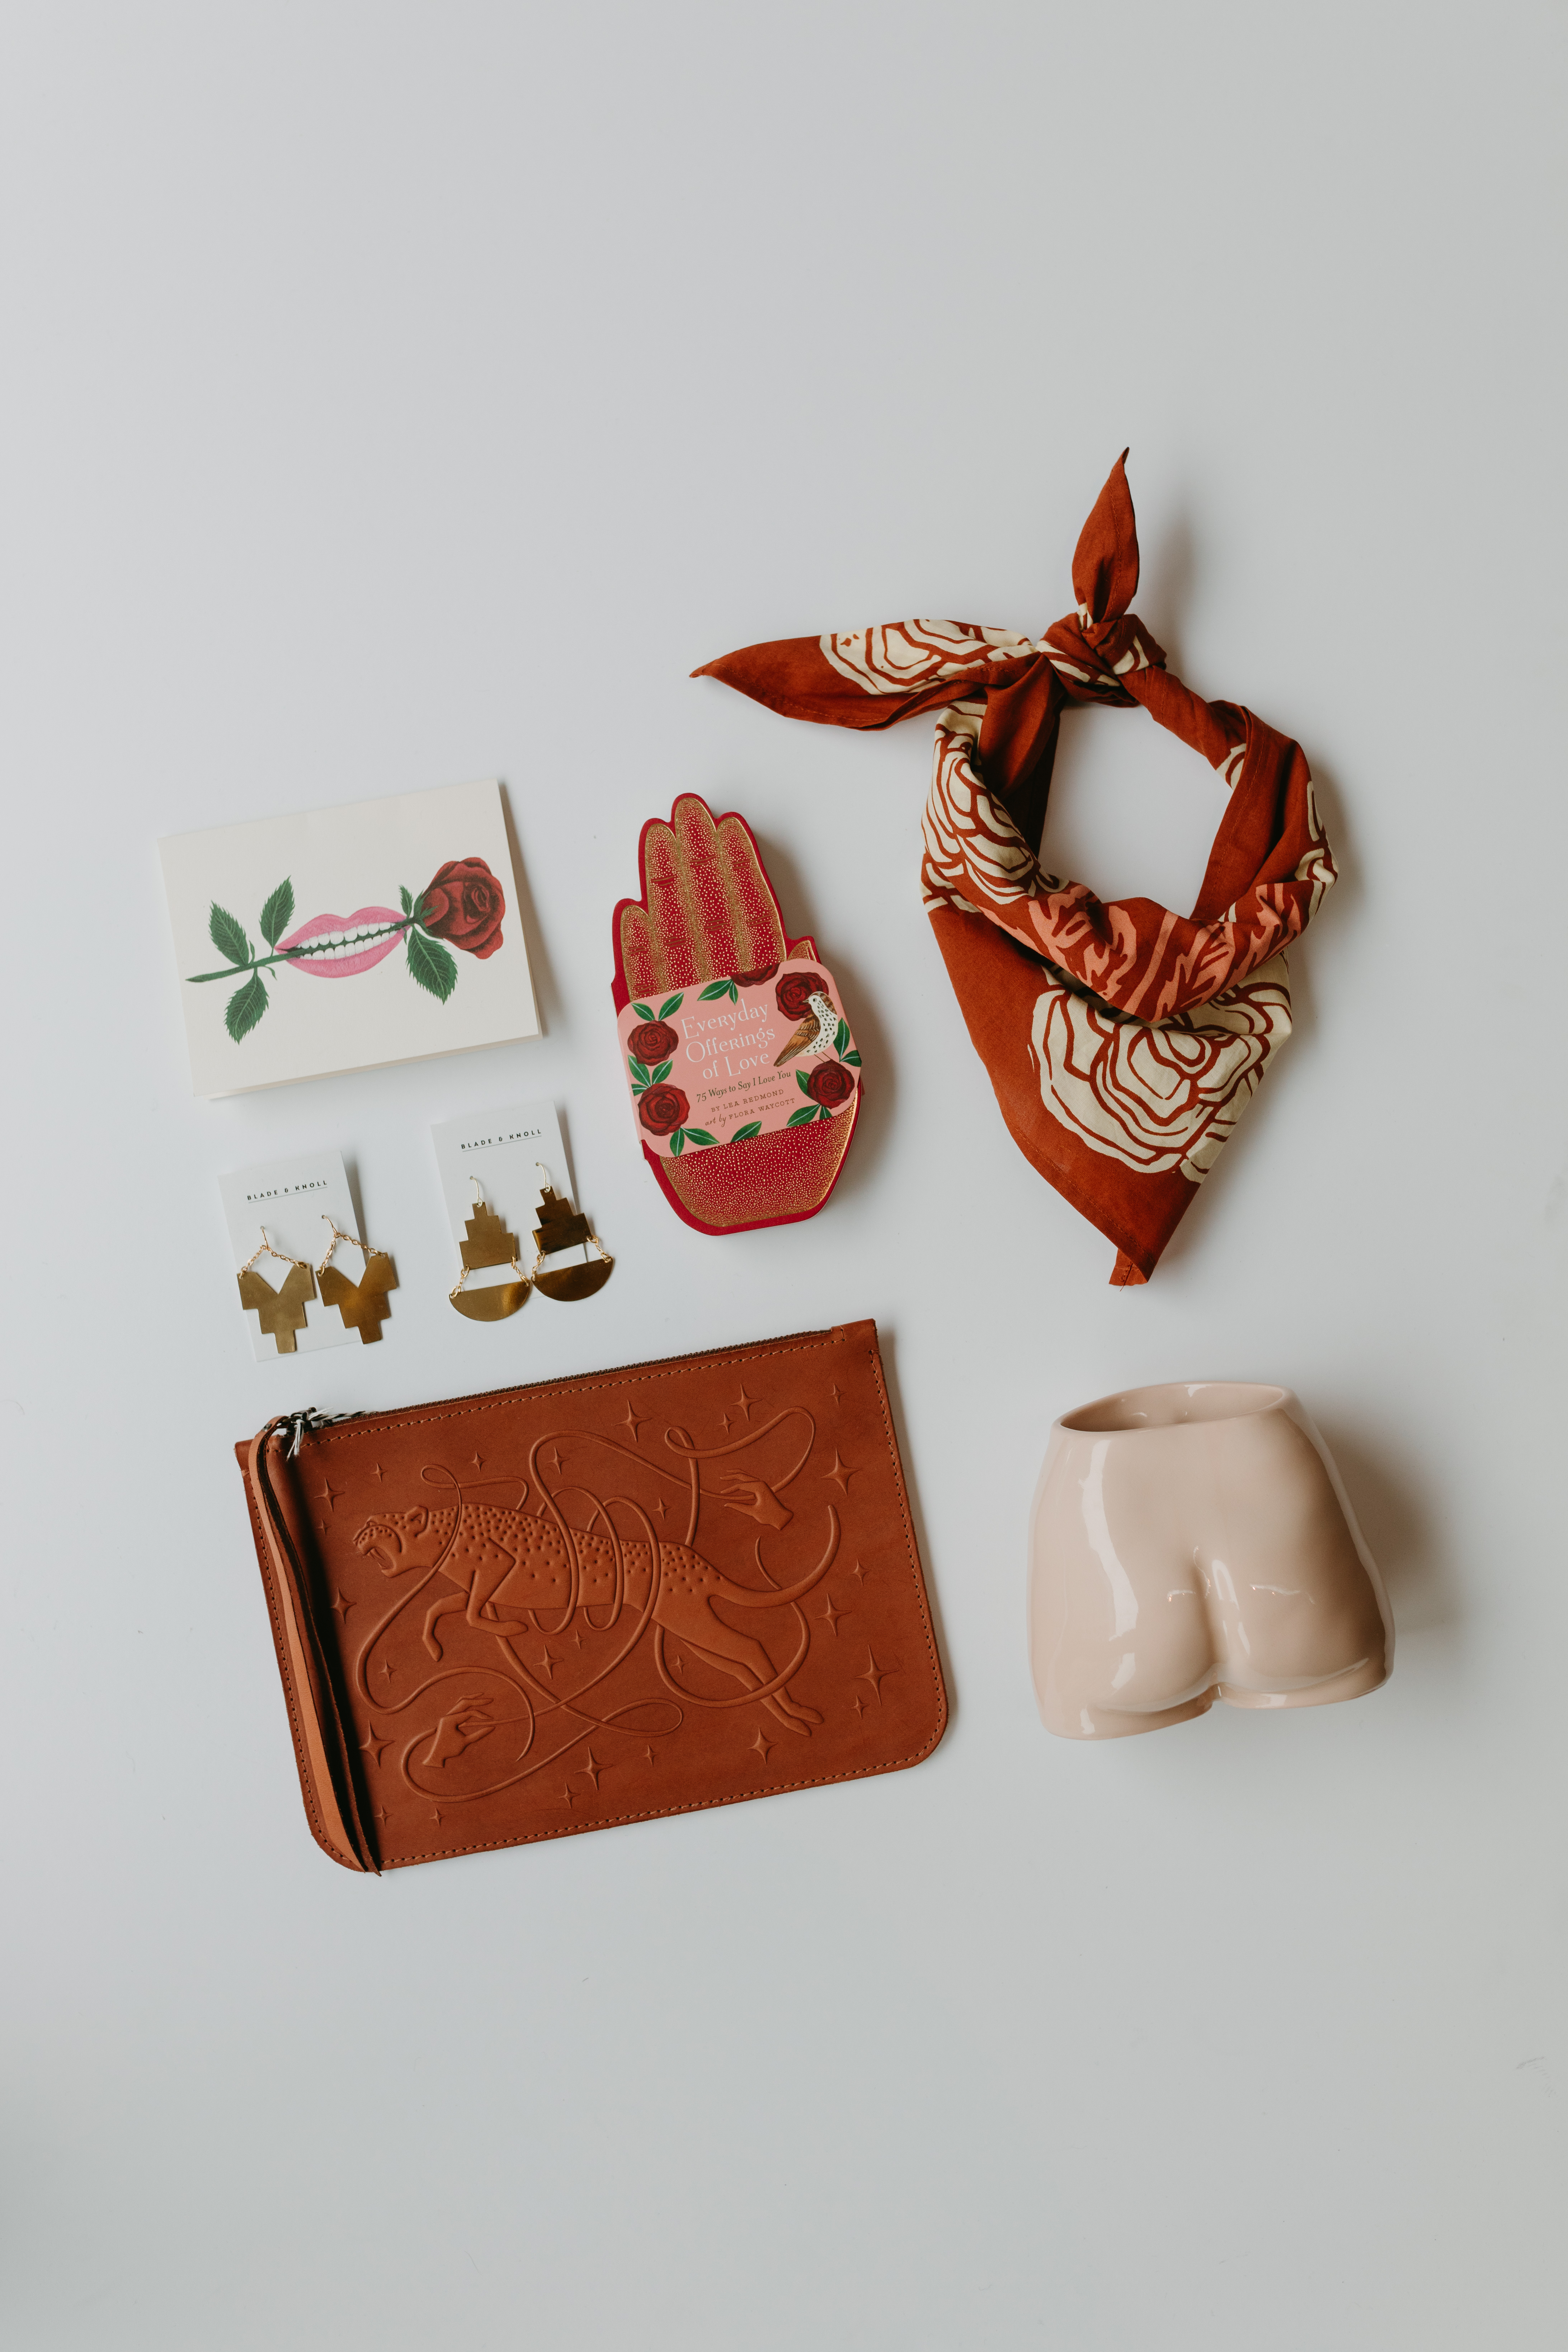 Seven objects on a blank white surface. A red ascot. A succulent potter in the shape of a persons buttocks. A leather pouch with an imprinted leopard. Two golden earrings. A postcard depicting a mouth biting a rose. A red hand with the text “Everyday Offerings of Love.”